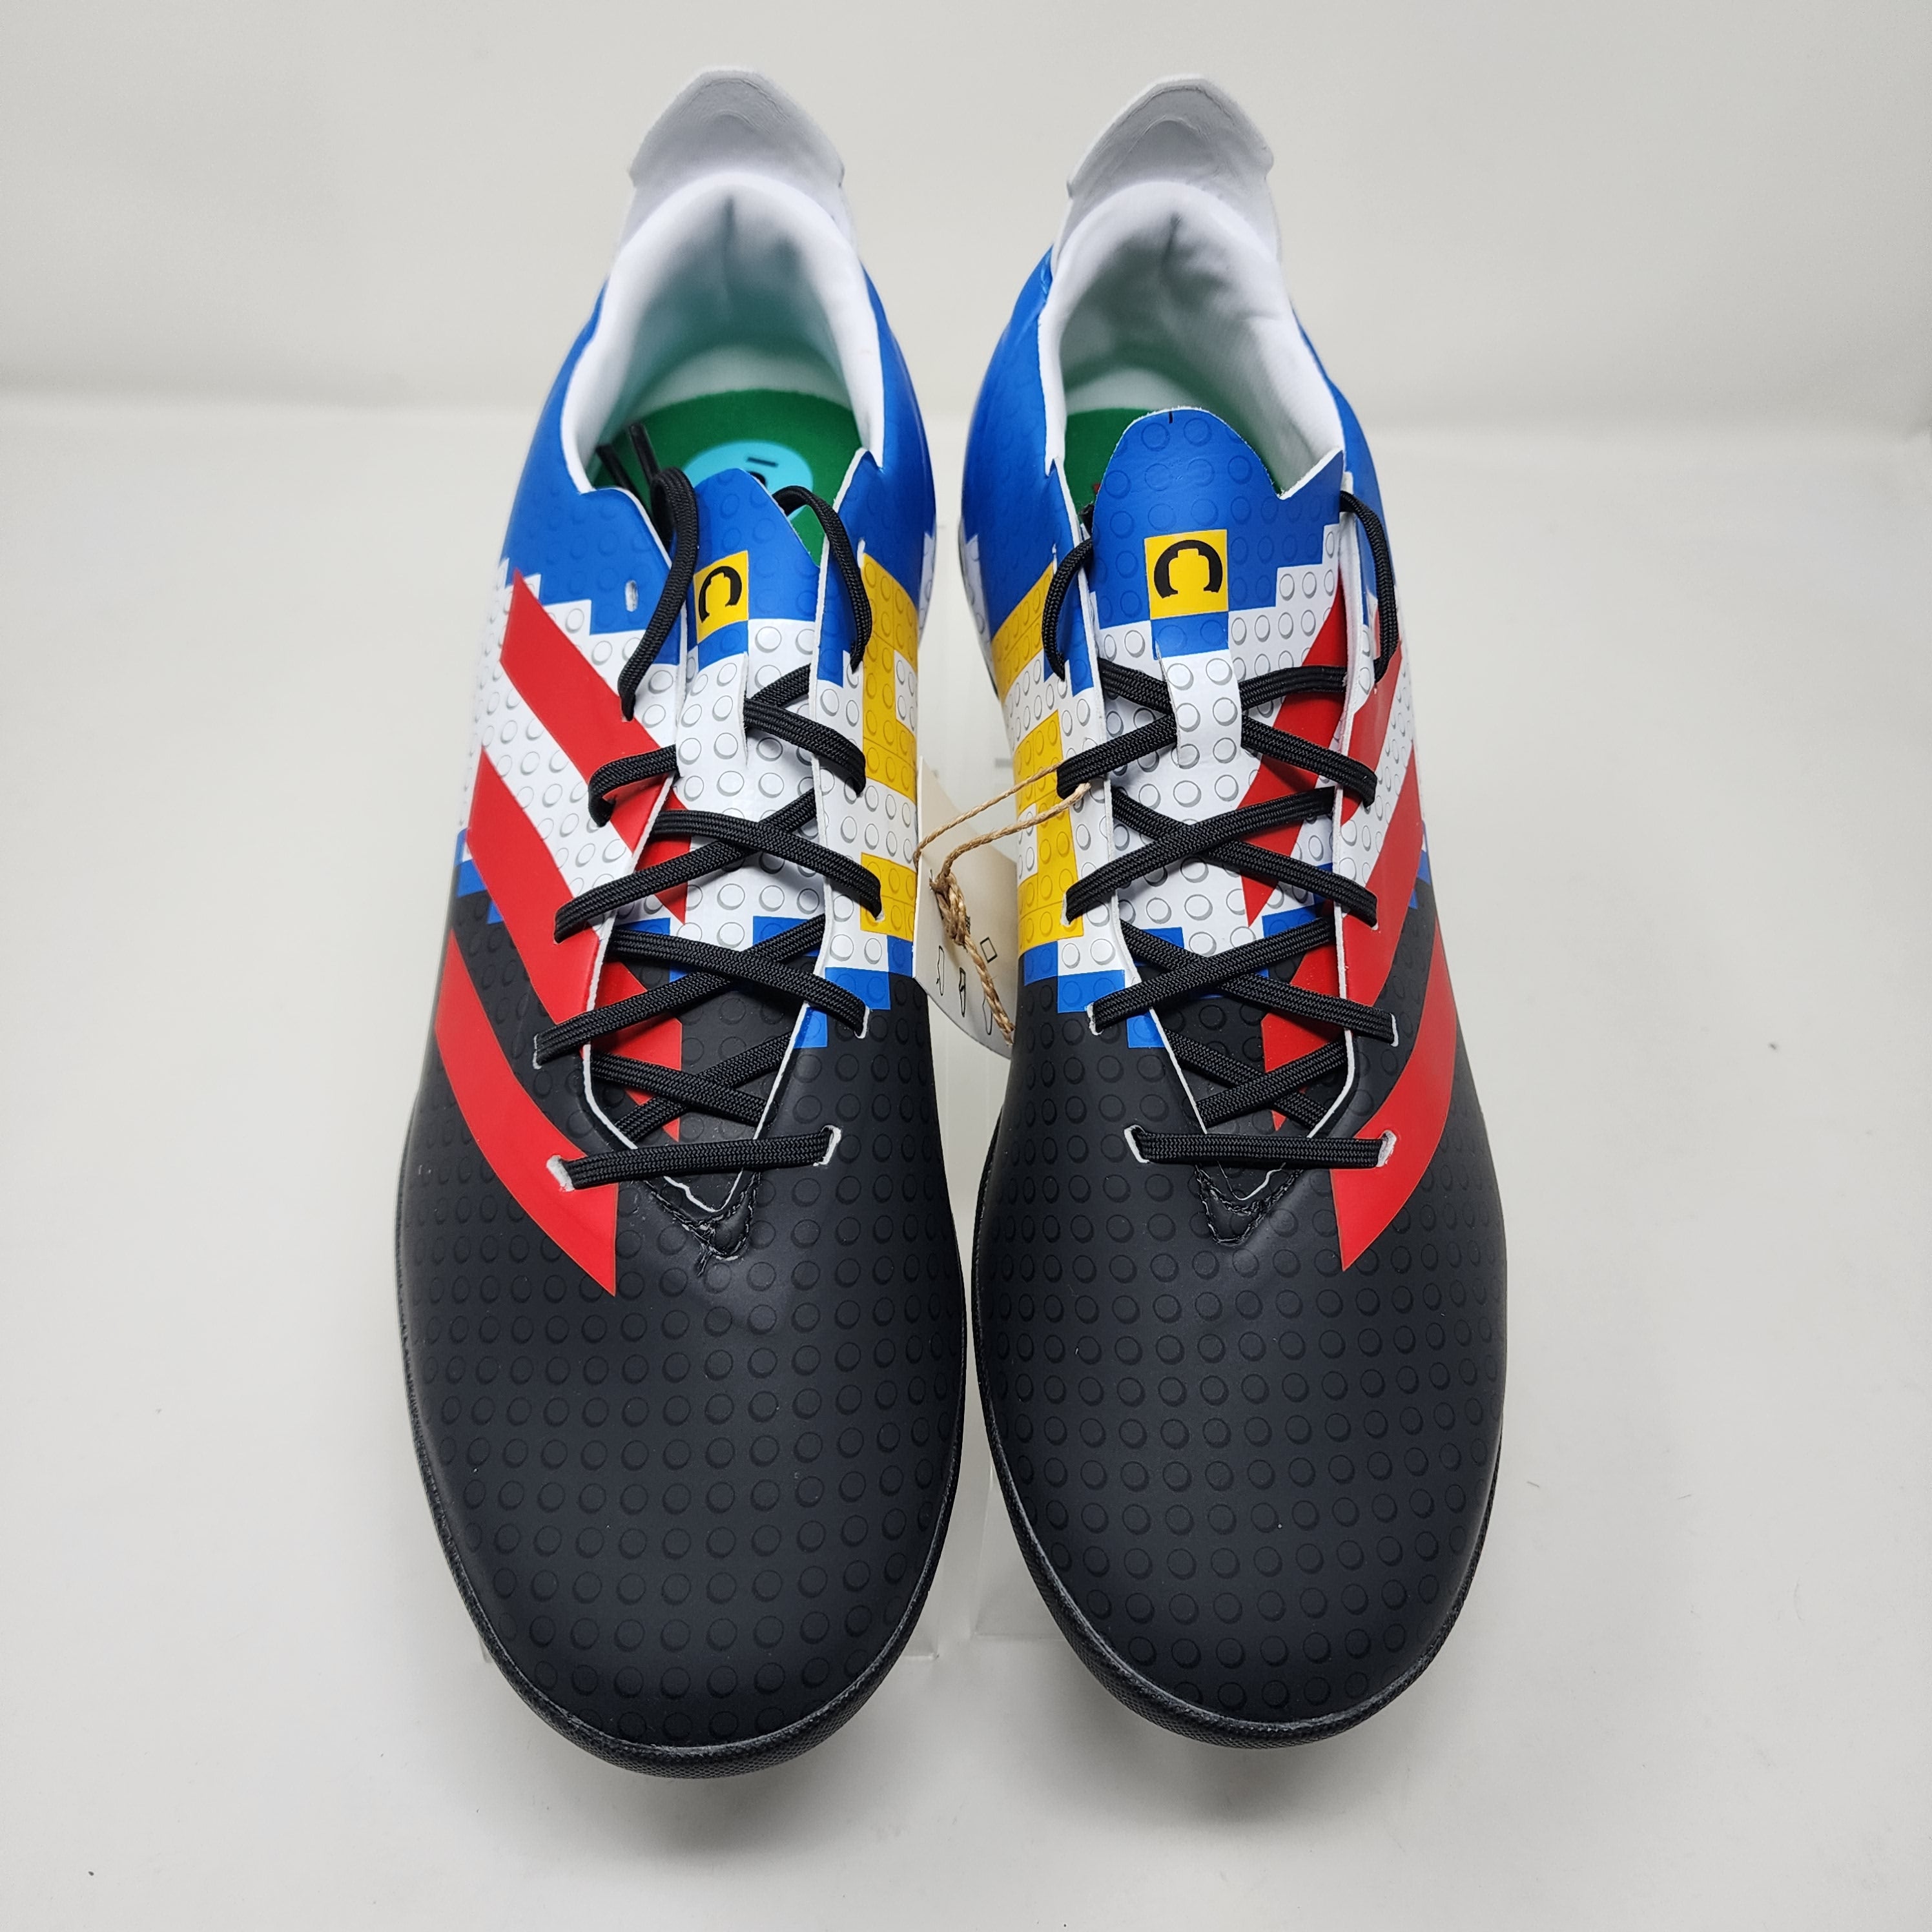 Adidas LEGO Gamemode FG Soccer Cleats Men’s Size 6 Women’s 7 Shoes NEW